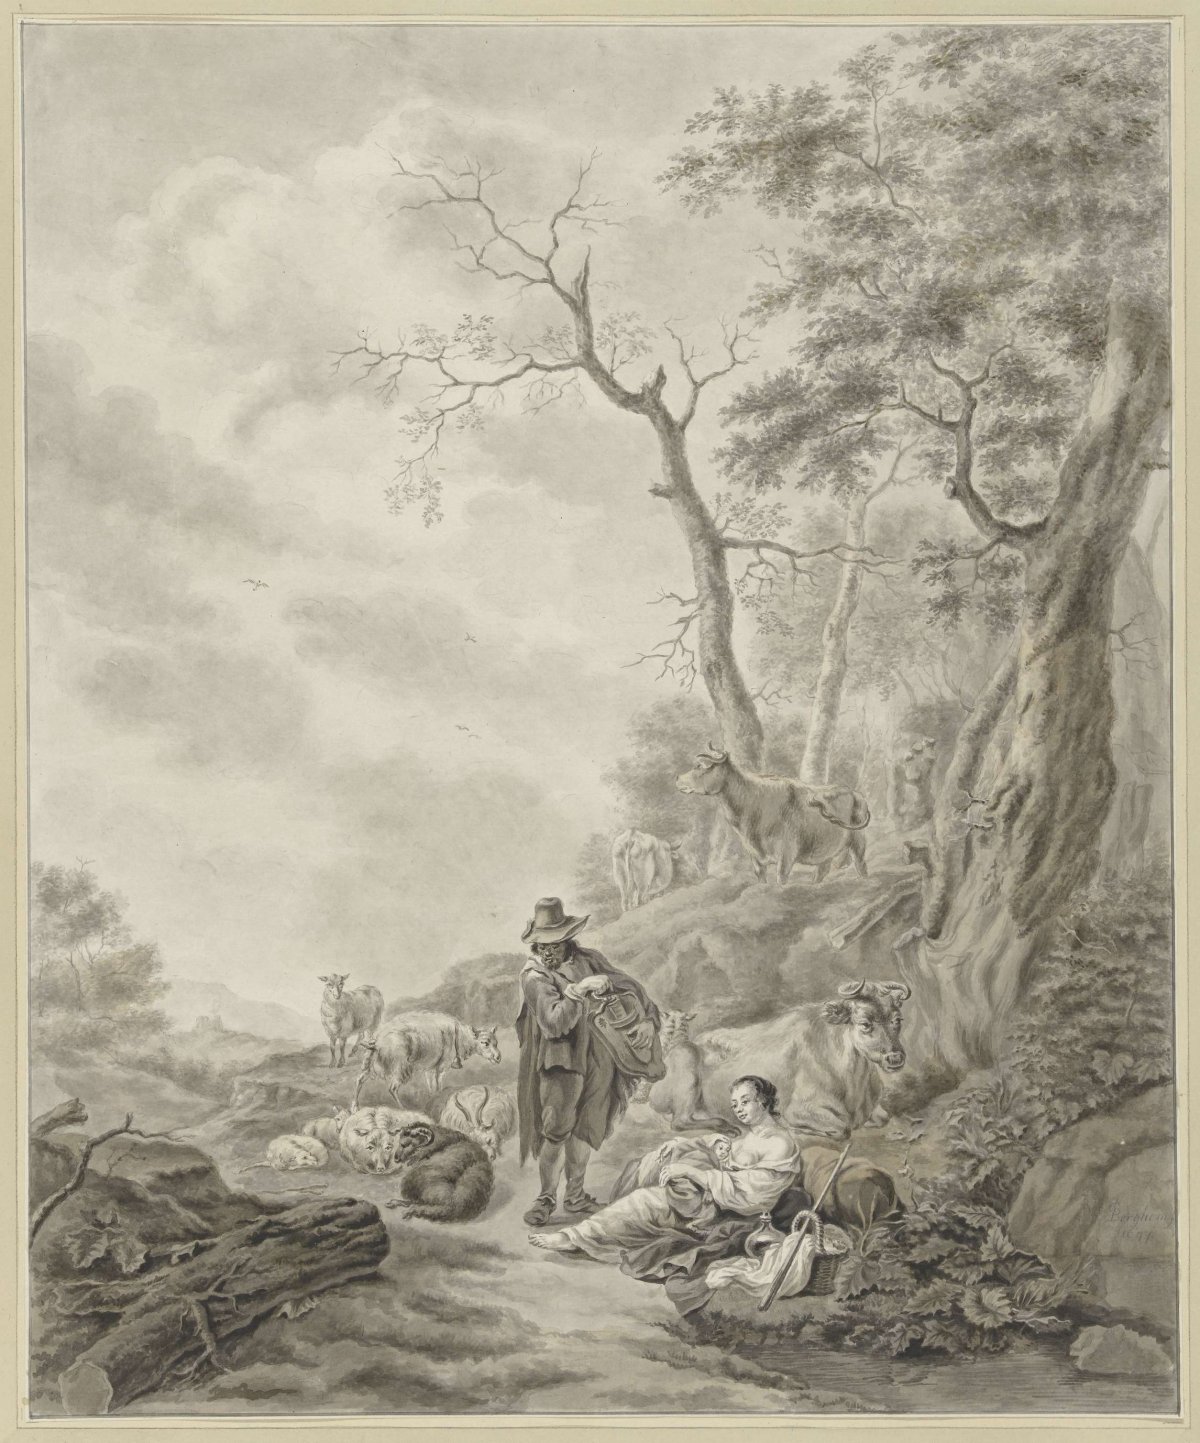 Landscape with lyre man with shepherdess and cattle, Abraham Delfos, 1741 - 1820